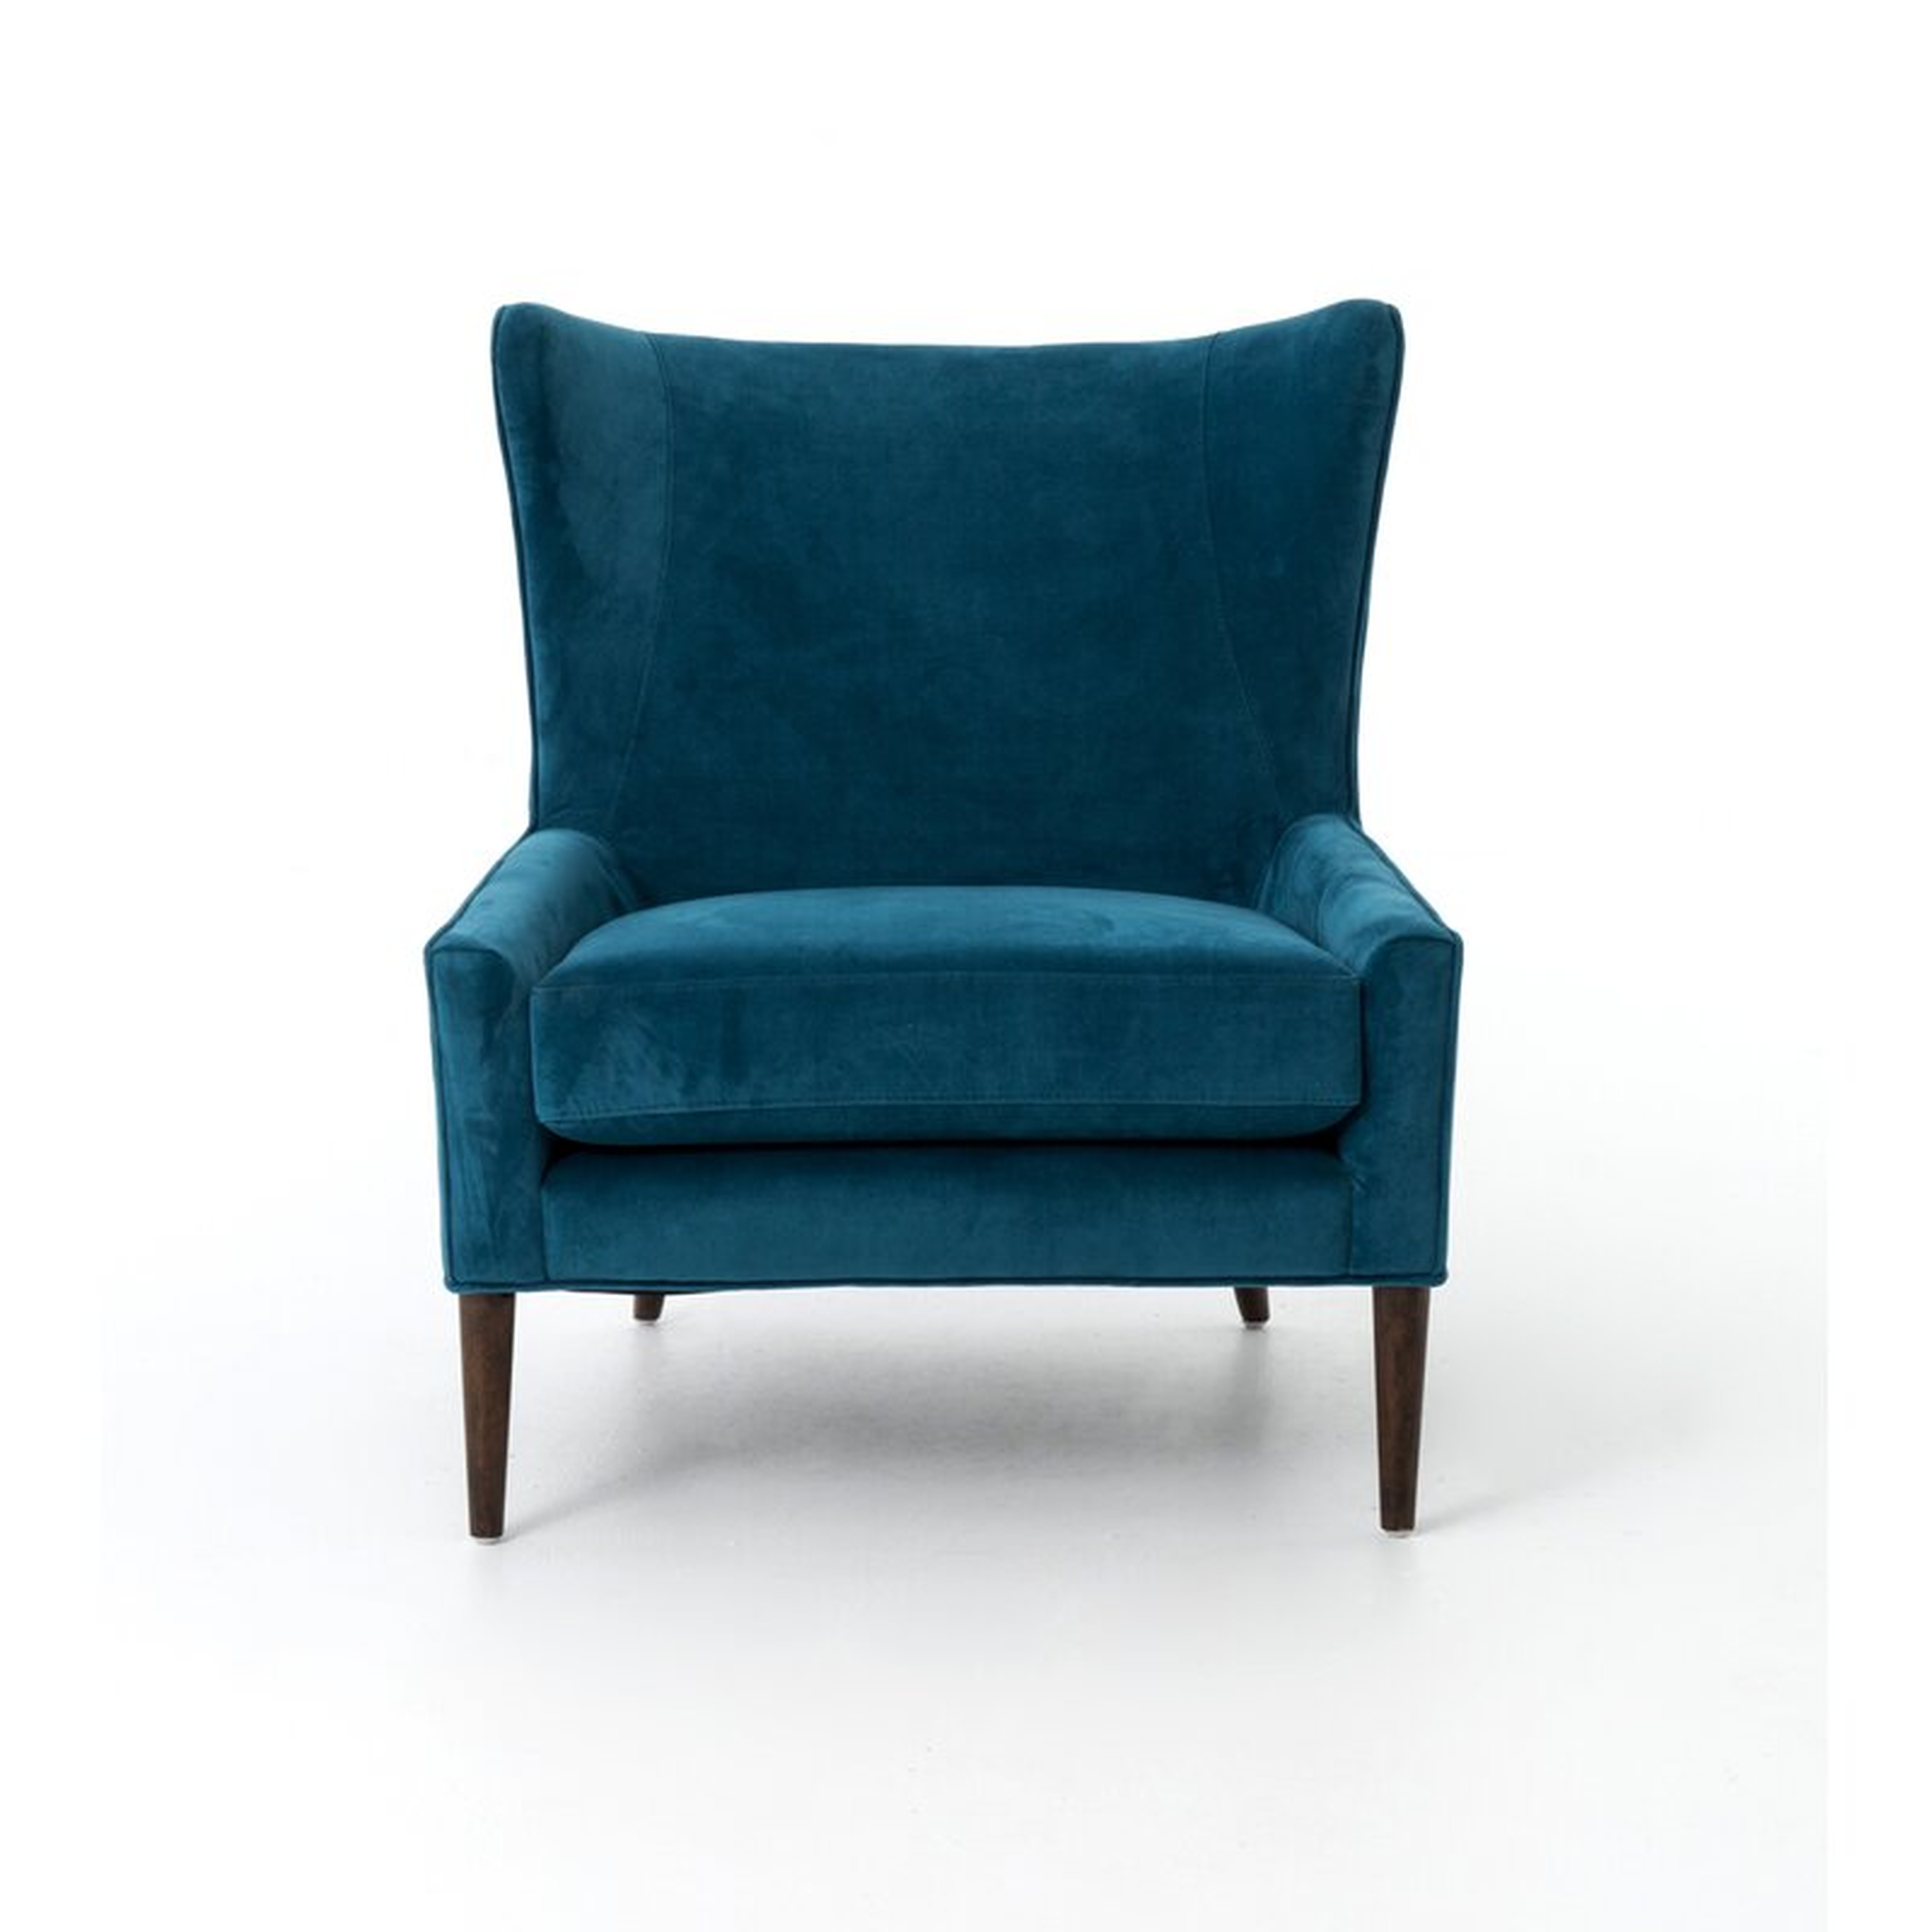 Four Hands Marlow Wingback Chair Fabric: Bella Bayoux - Perigold